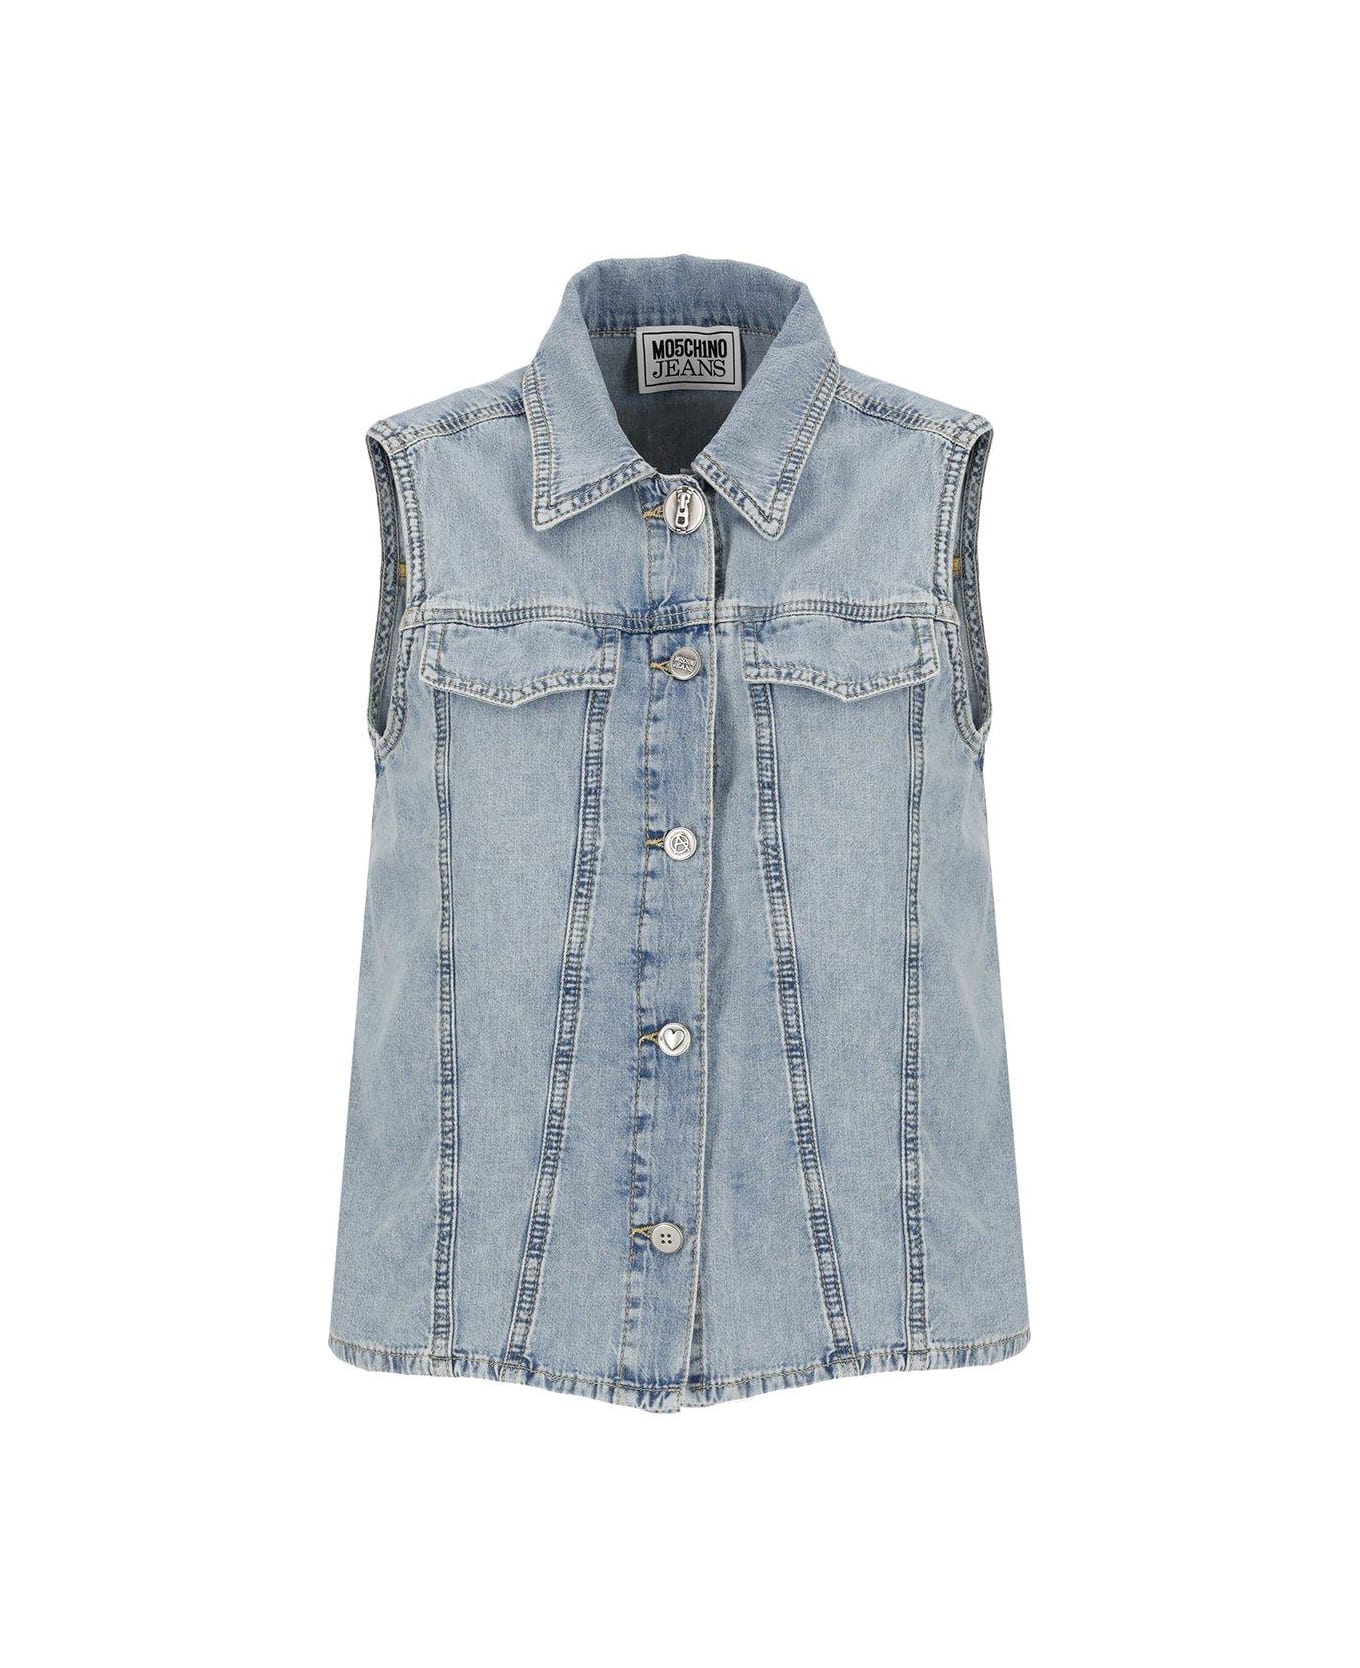 M05CH1N0 Jeans Jeans Button-up Denim Gilet - Stone Washed